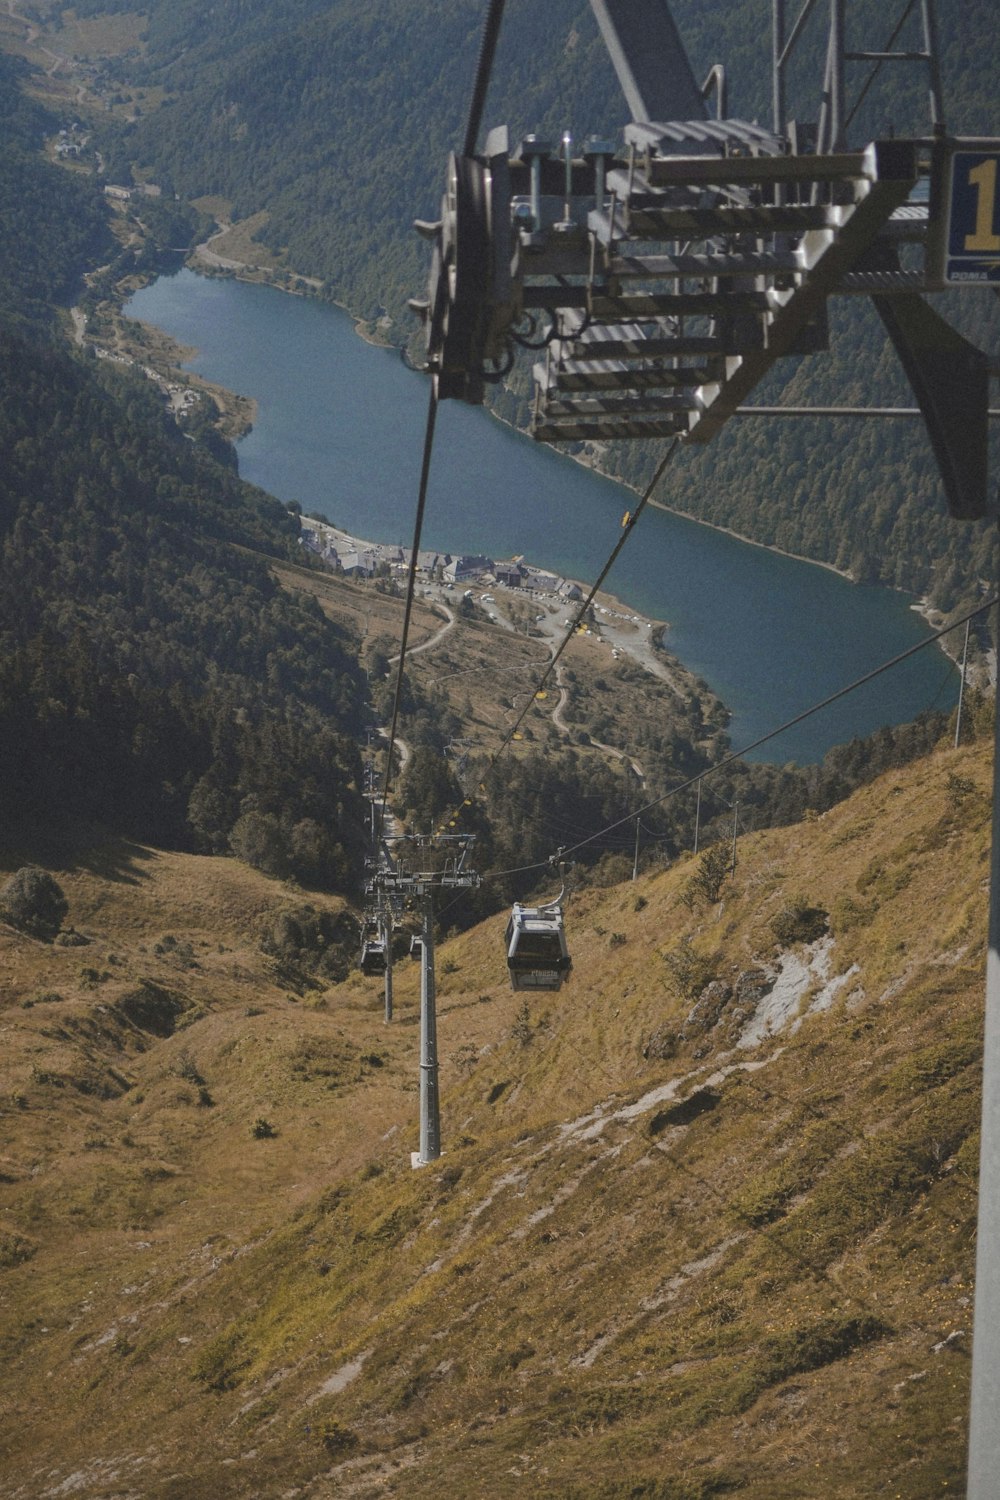 a ski lift going up a hill with a lake in the background